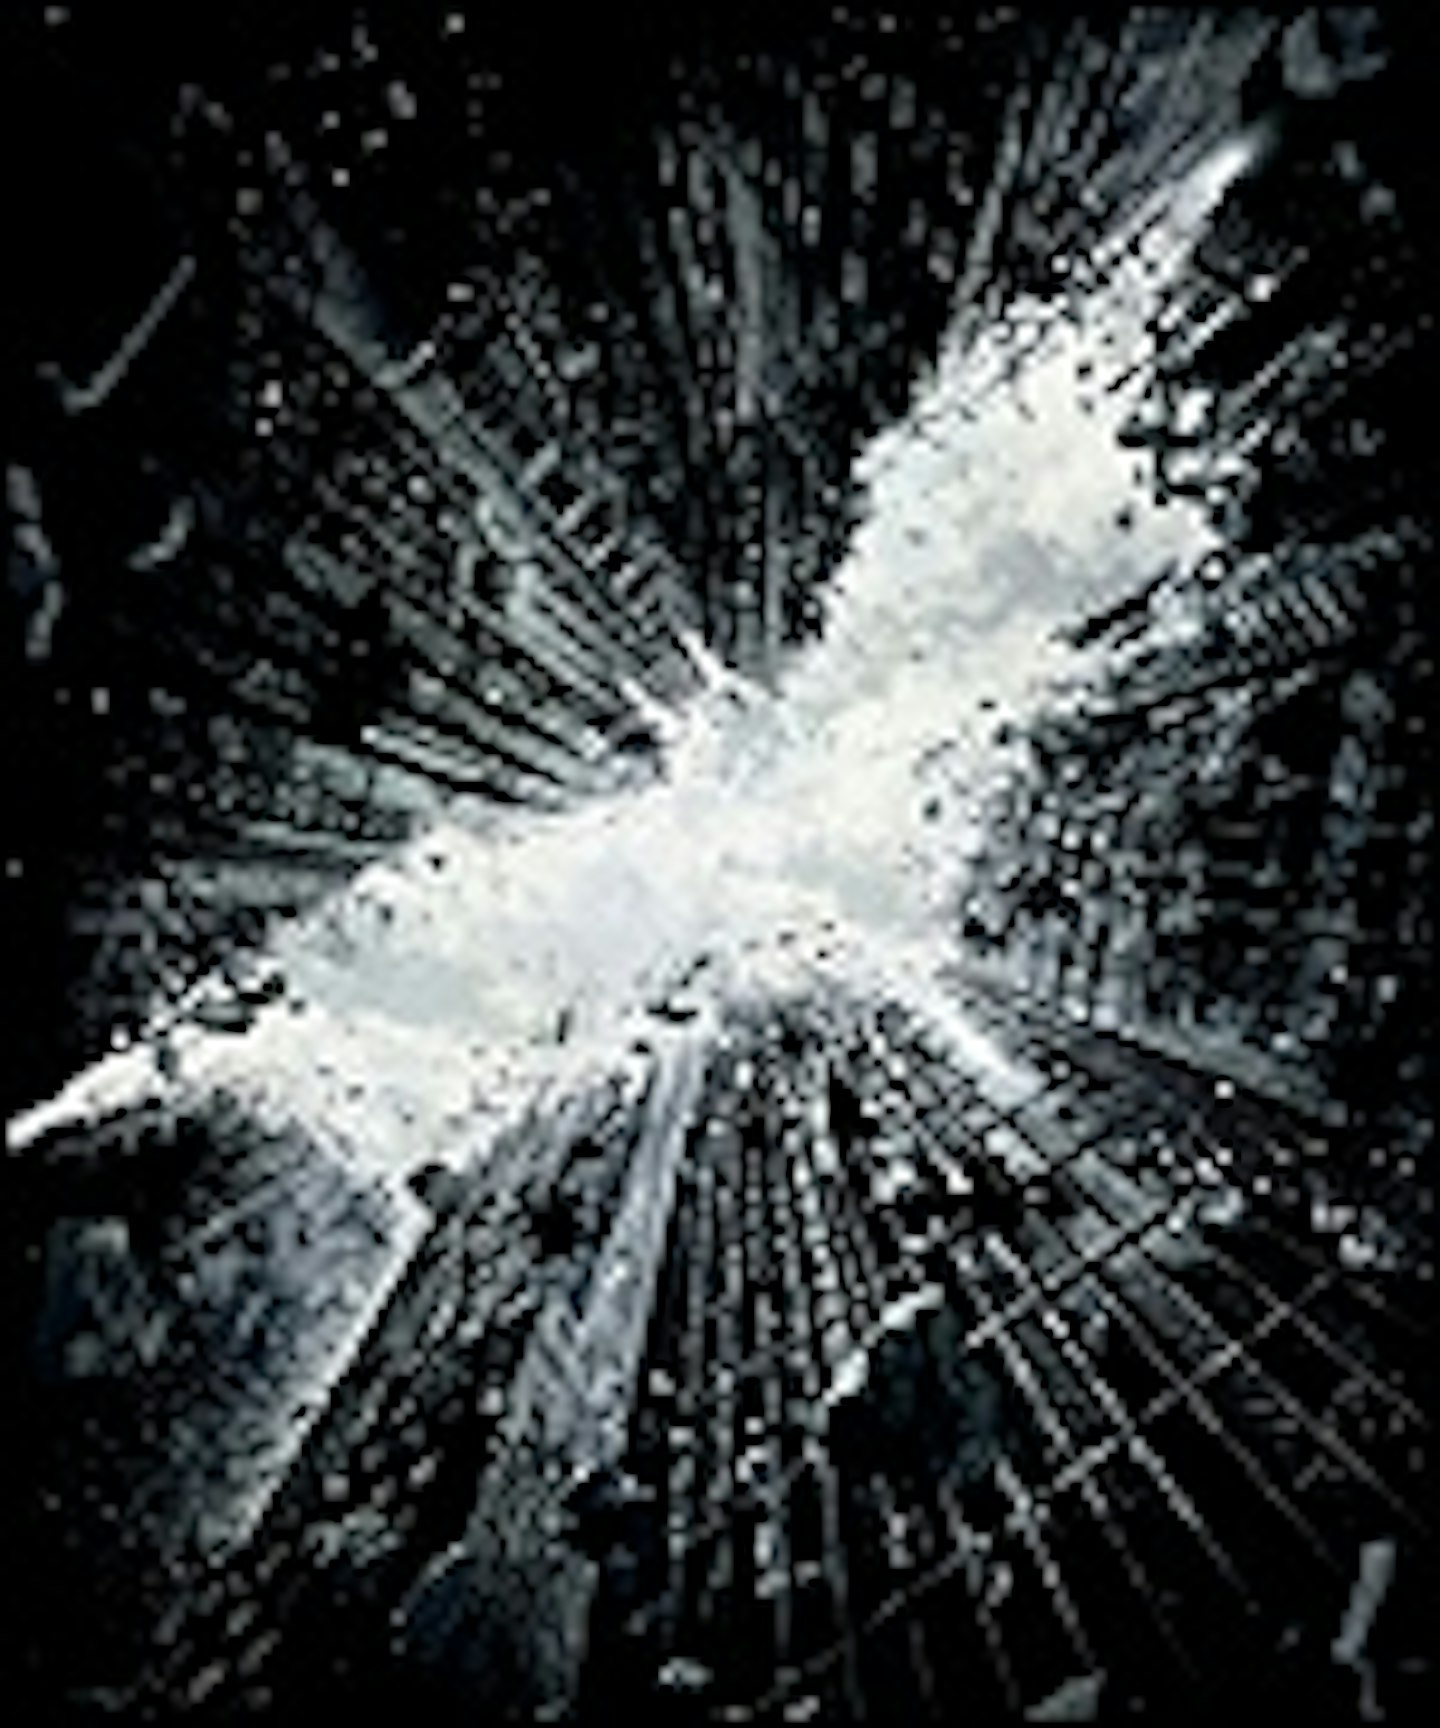 Dark Knight Rises Teaser Is Official!